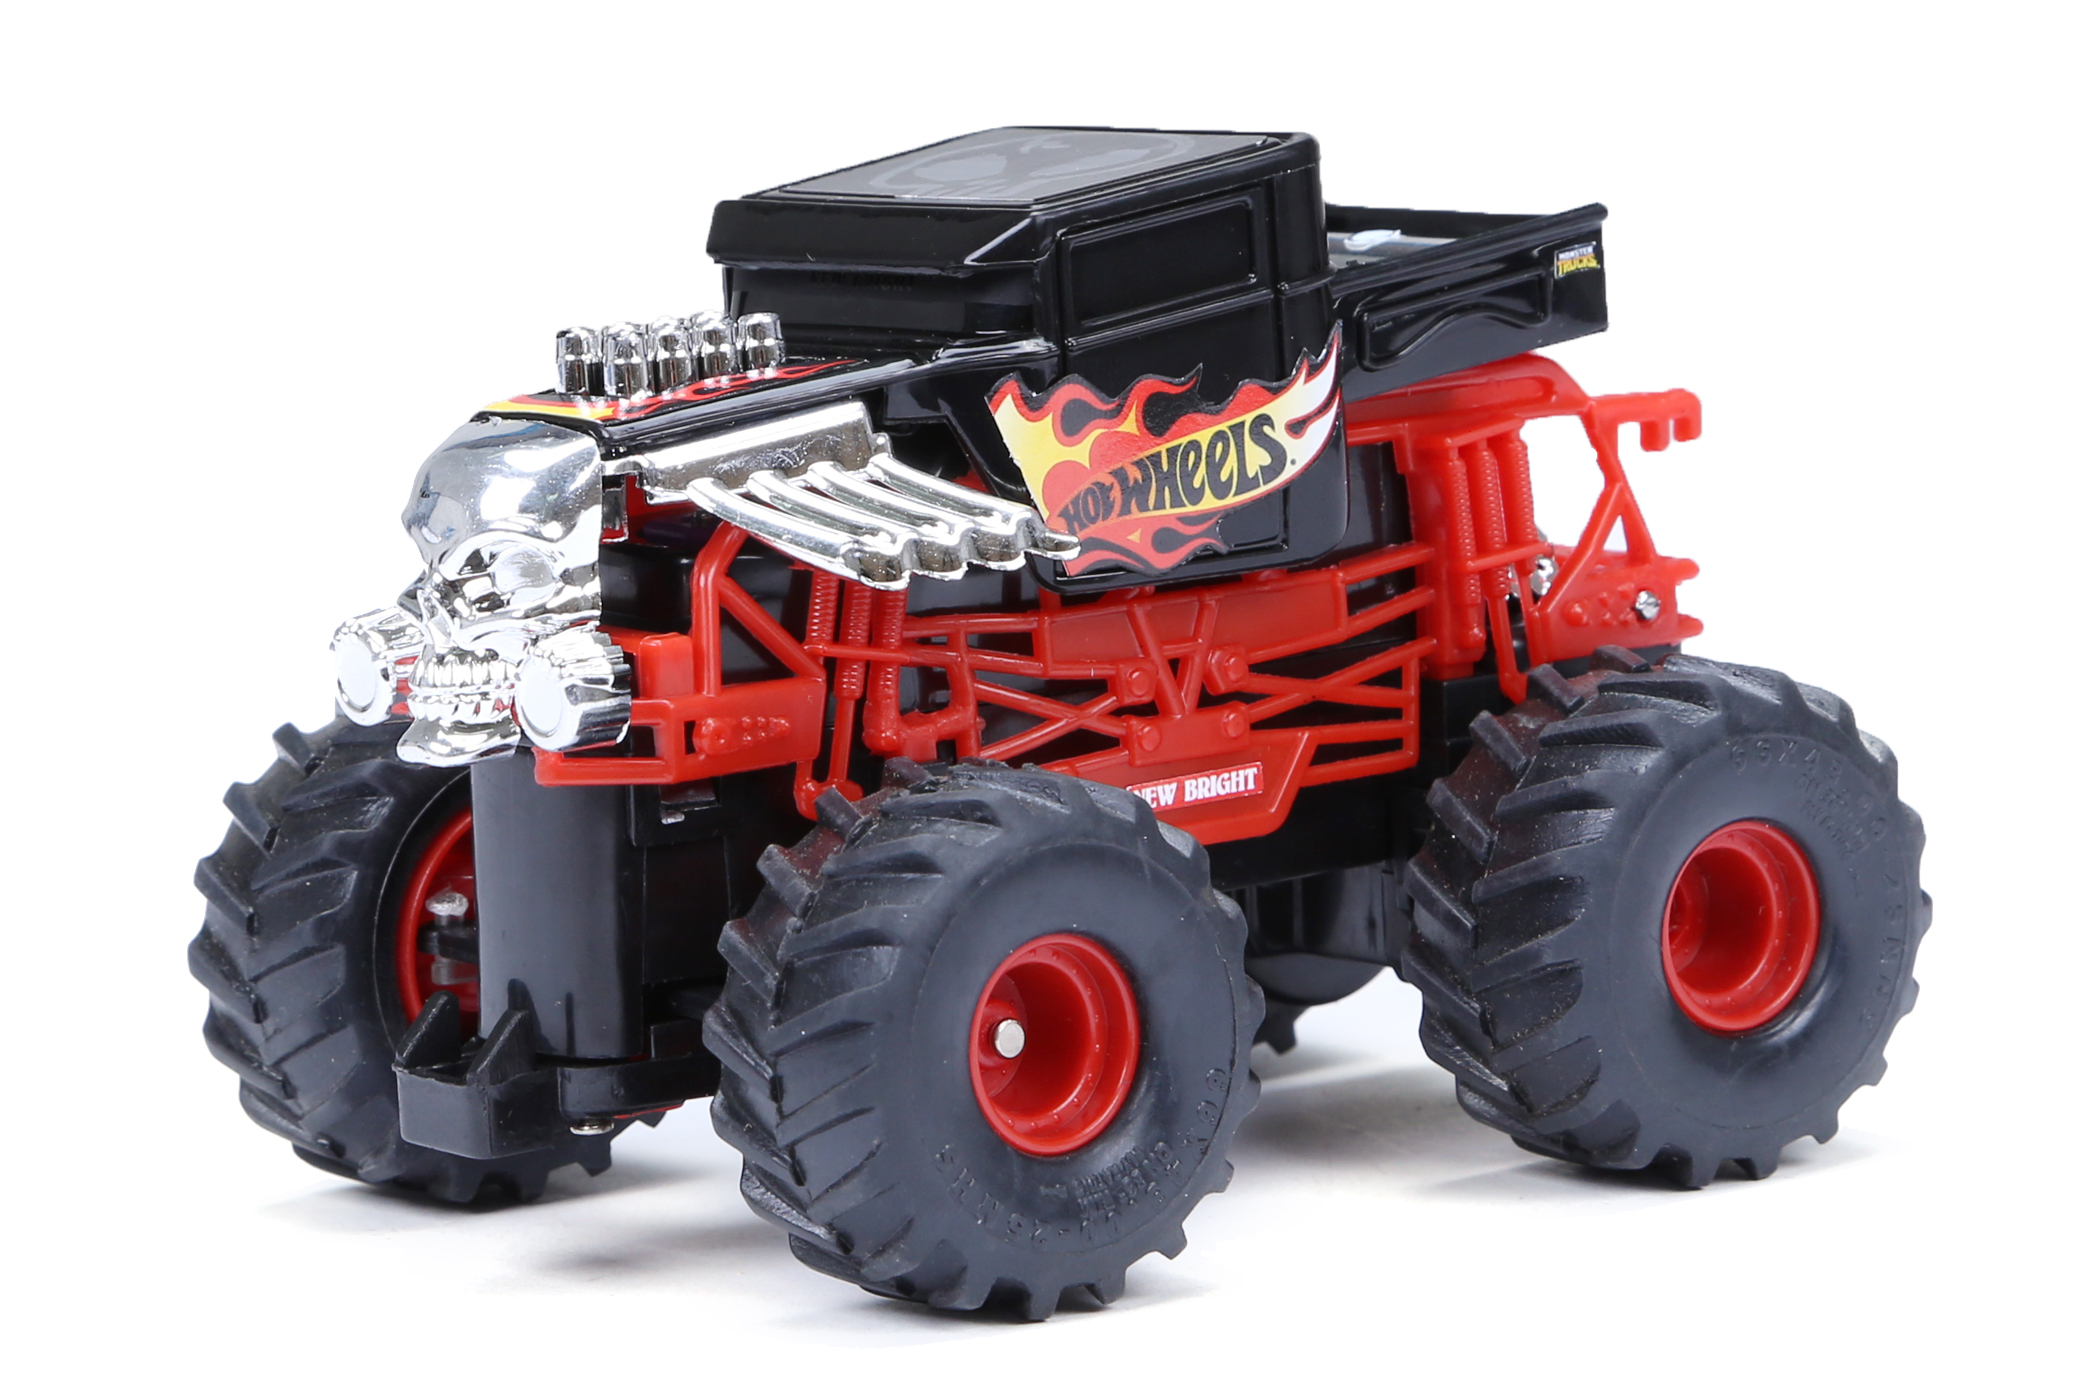 New Bright 1:43 Scale Remote Controlled Bone Shaker Monster Truck Play Vehicle - image 1 of 10